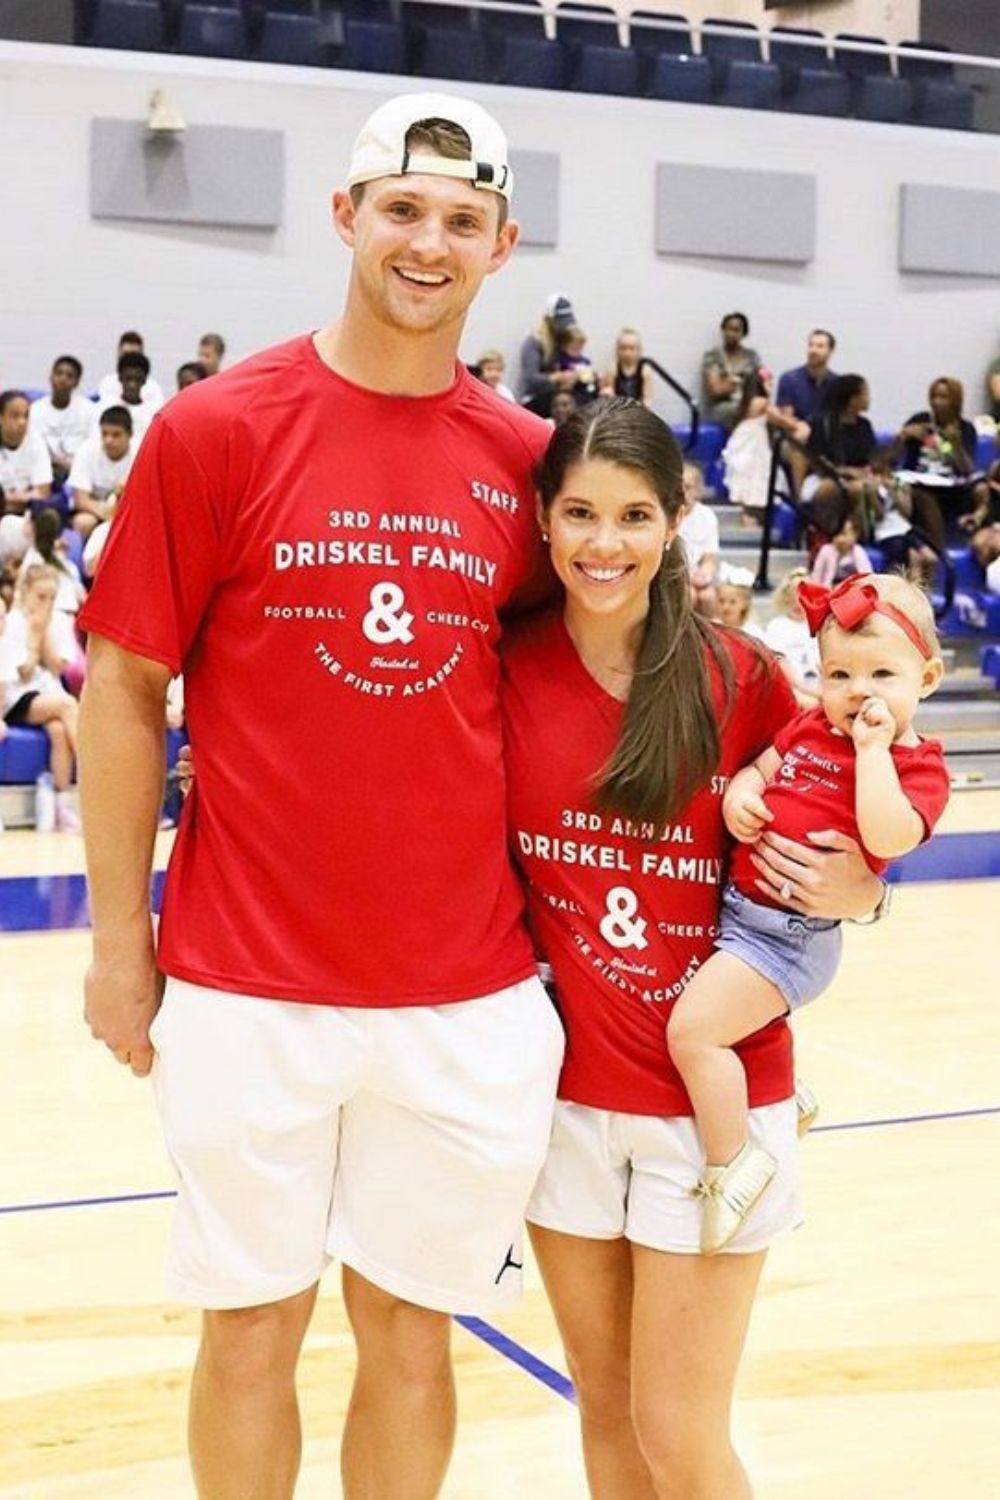 Jeff Driskel's Wife Tarin Moses and Their Child